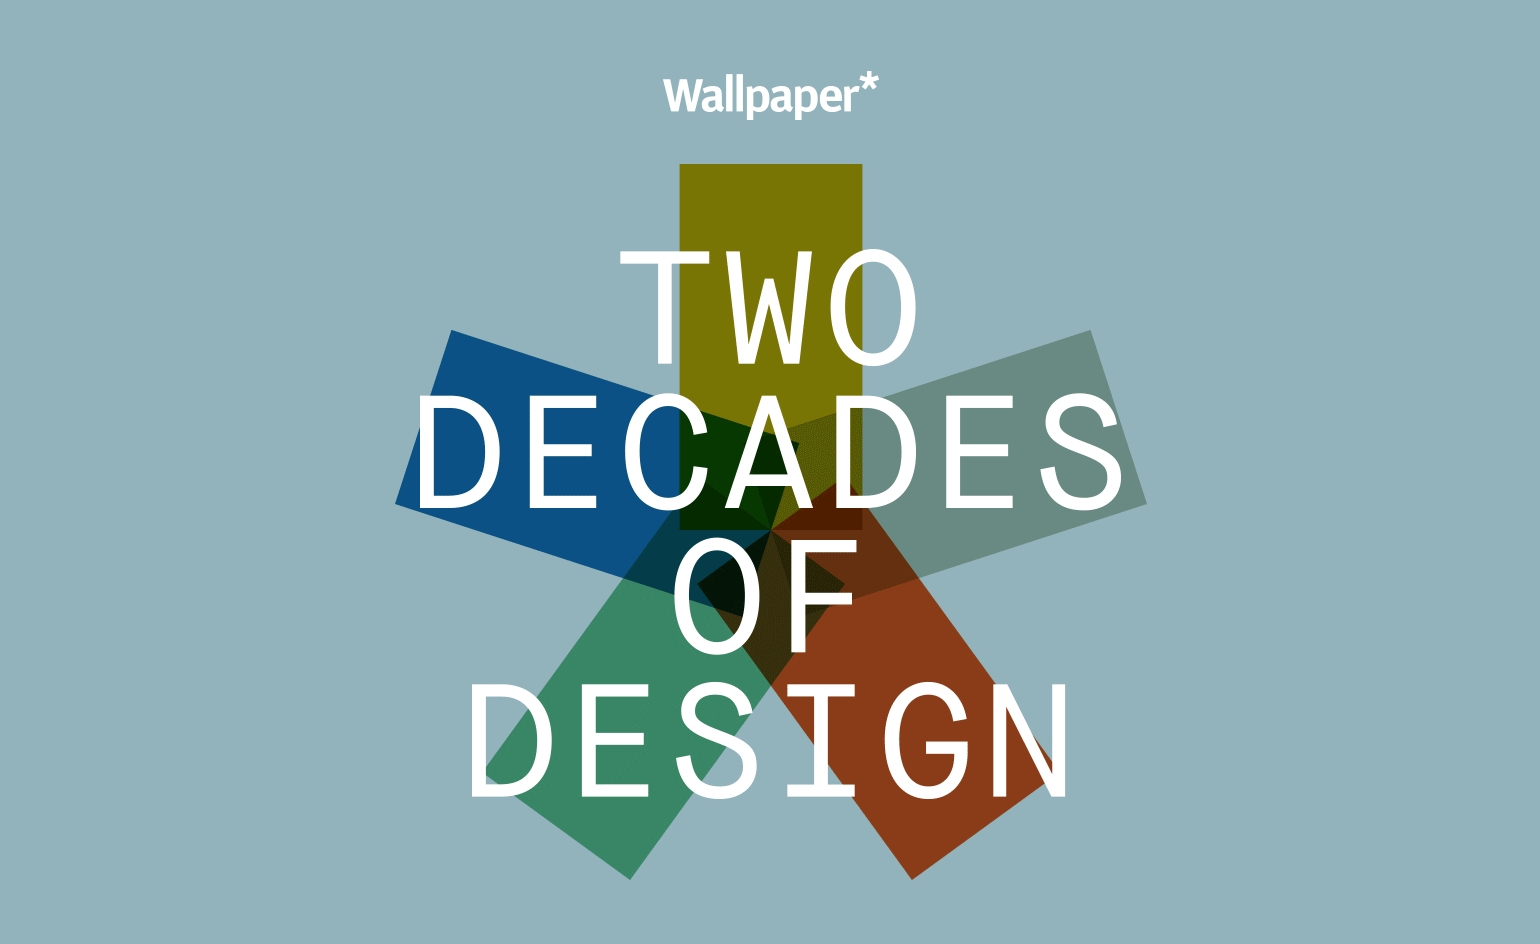 Two decades of Design